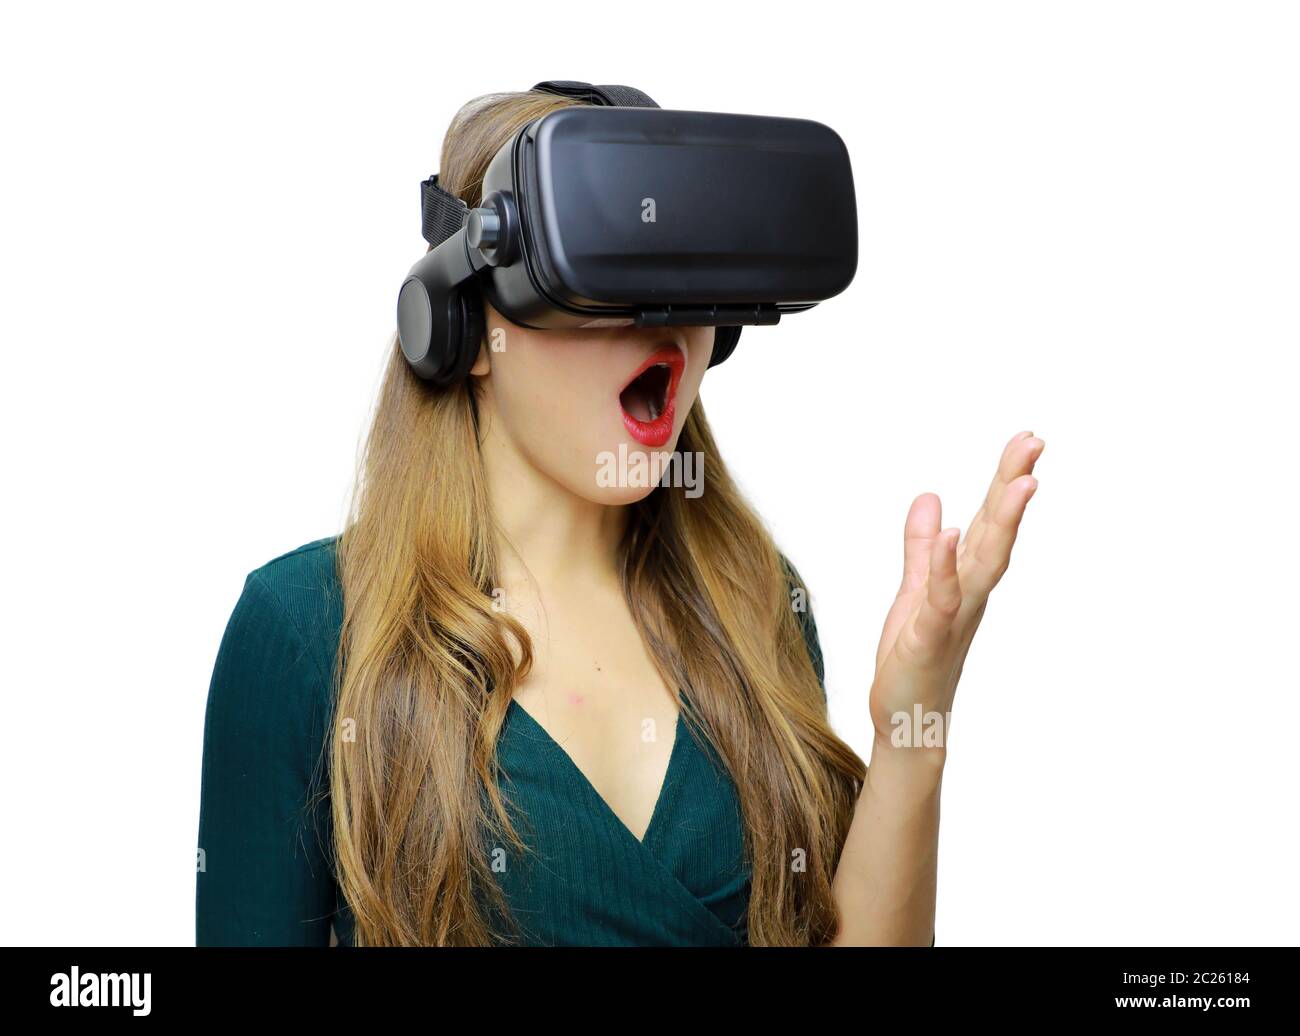 Wondering Young Woman in Virtual Reality Glasses over white background.  Shocked Girl wearing VR device. Close-up portrait of Female with VR headset  Stock Photo - Alamy